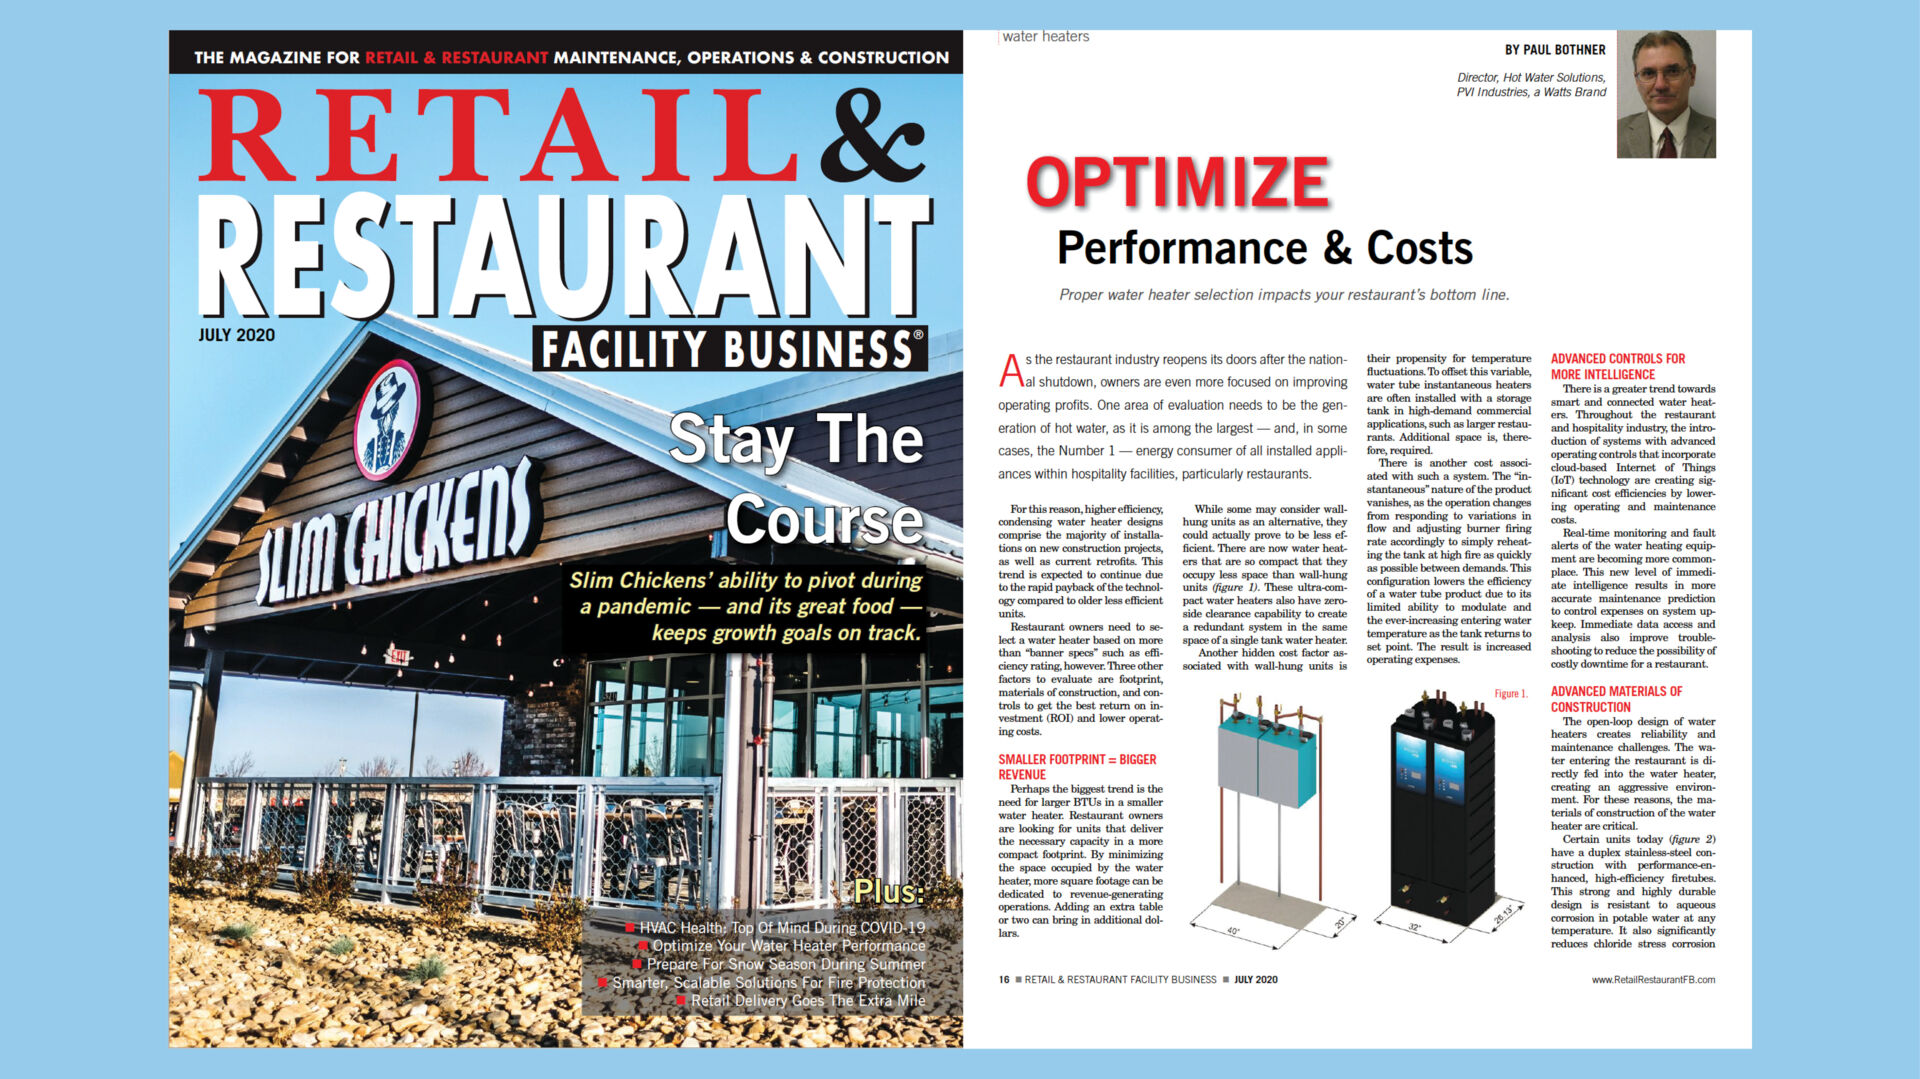 Optimize Performance and Costs at Restaurants - News